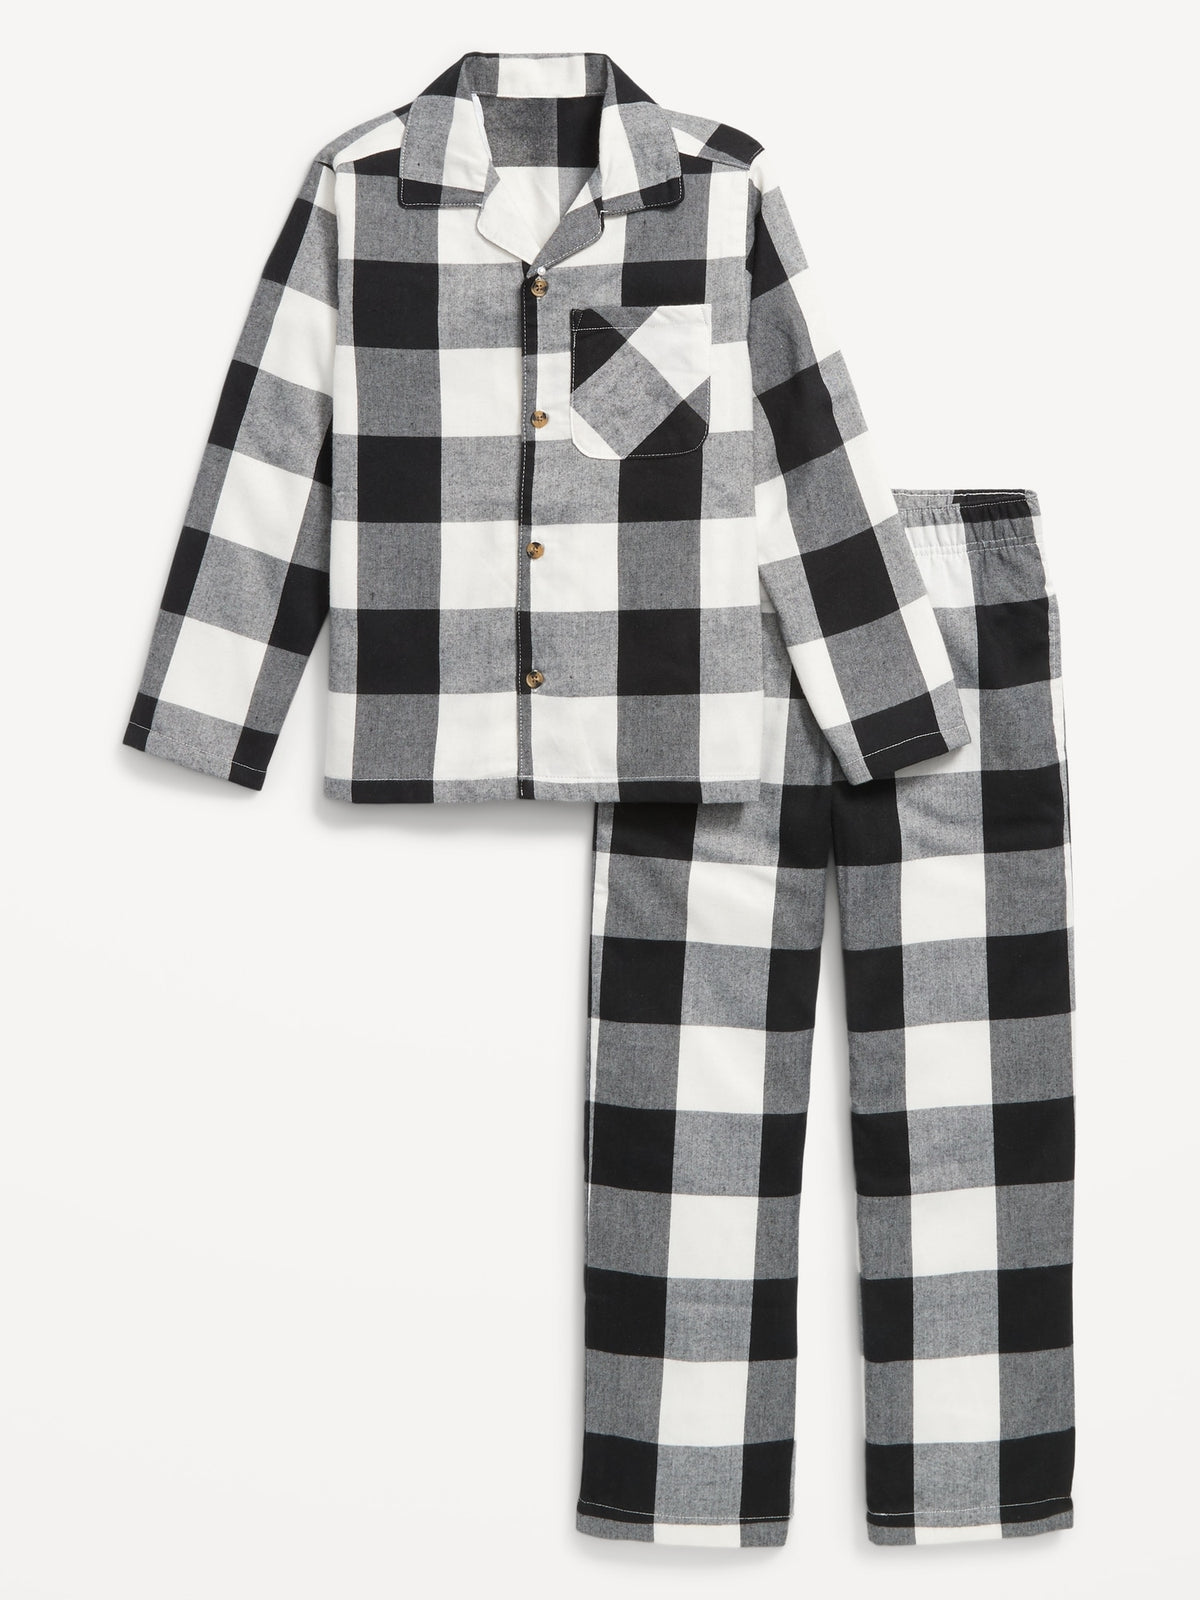 Gender-Neutral Matching Flannel Pajama Set for Kids - Old Navy Philippines